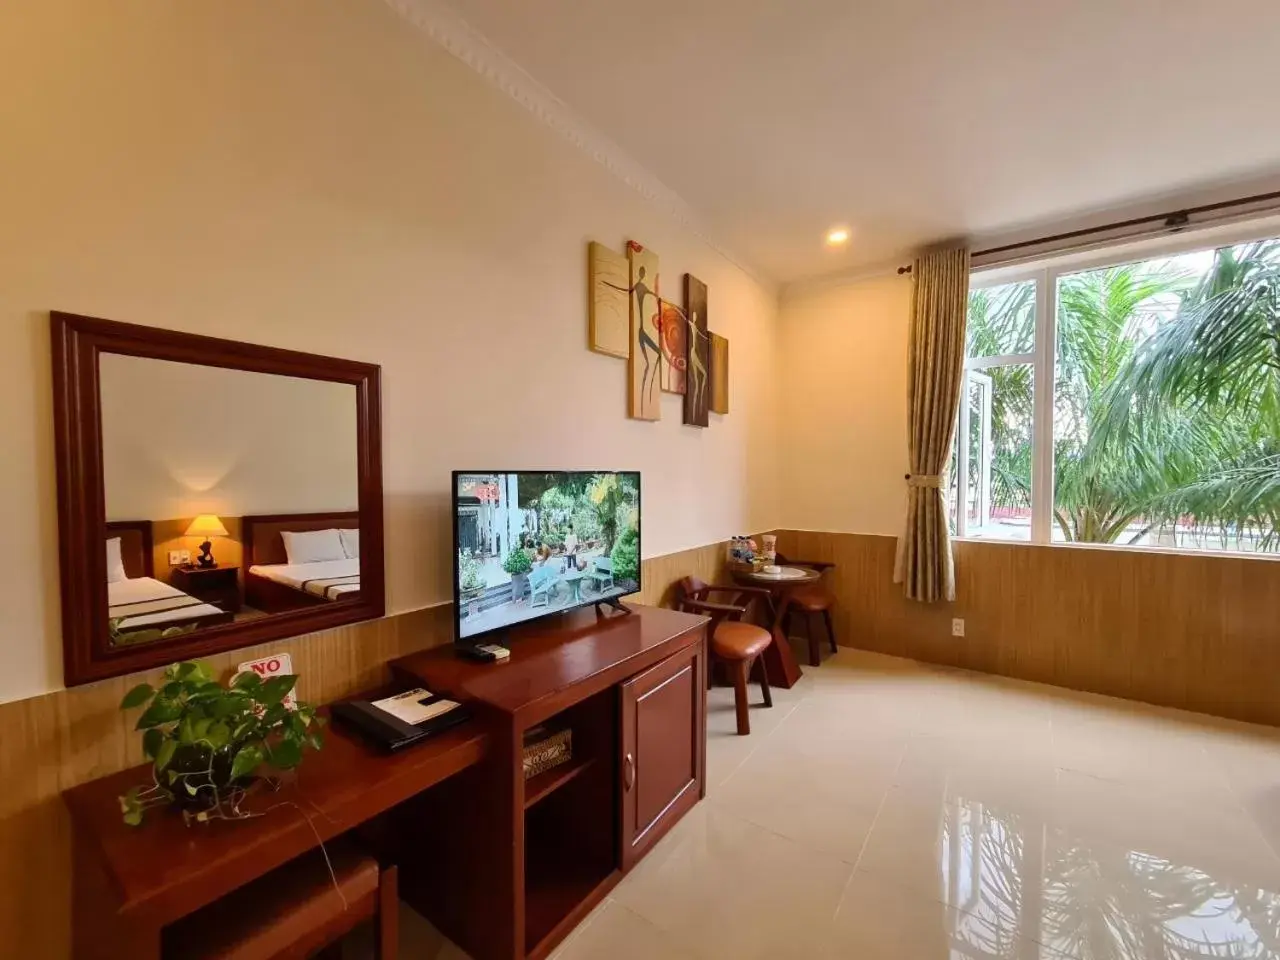 Superior Family Room in Hai Duong Intourco Resort